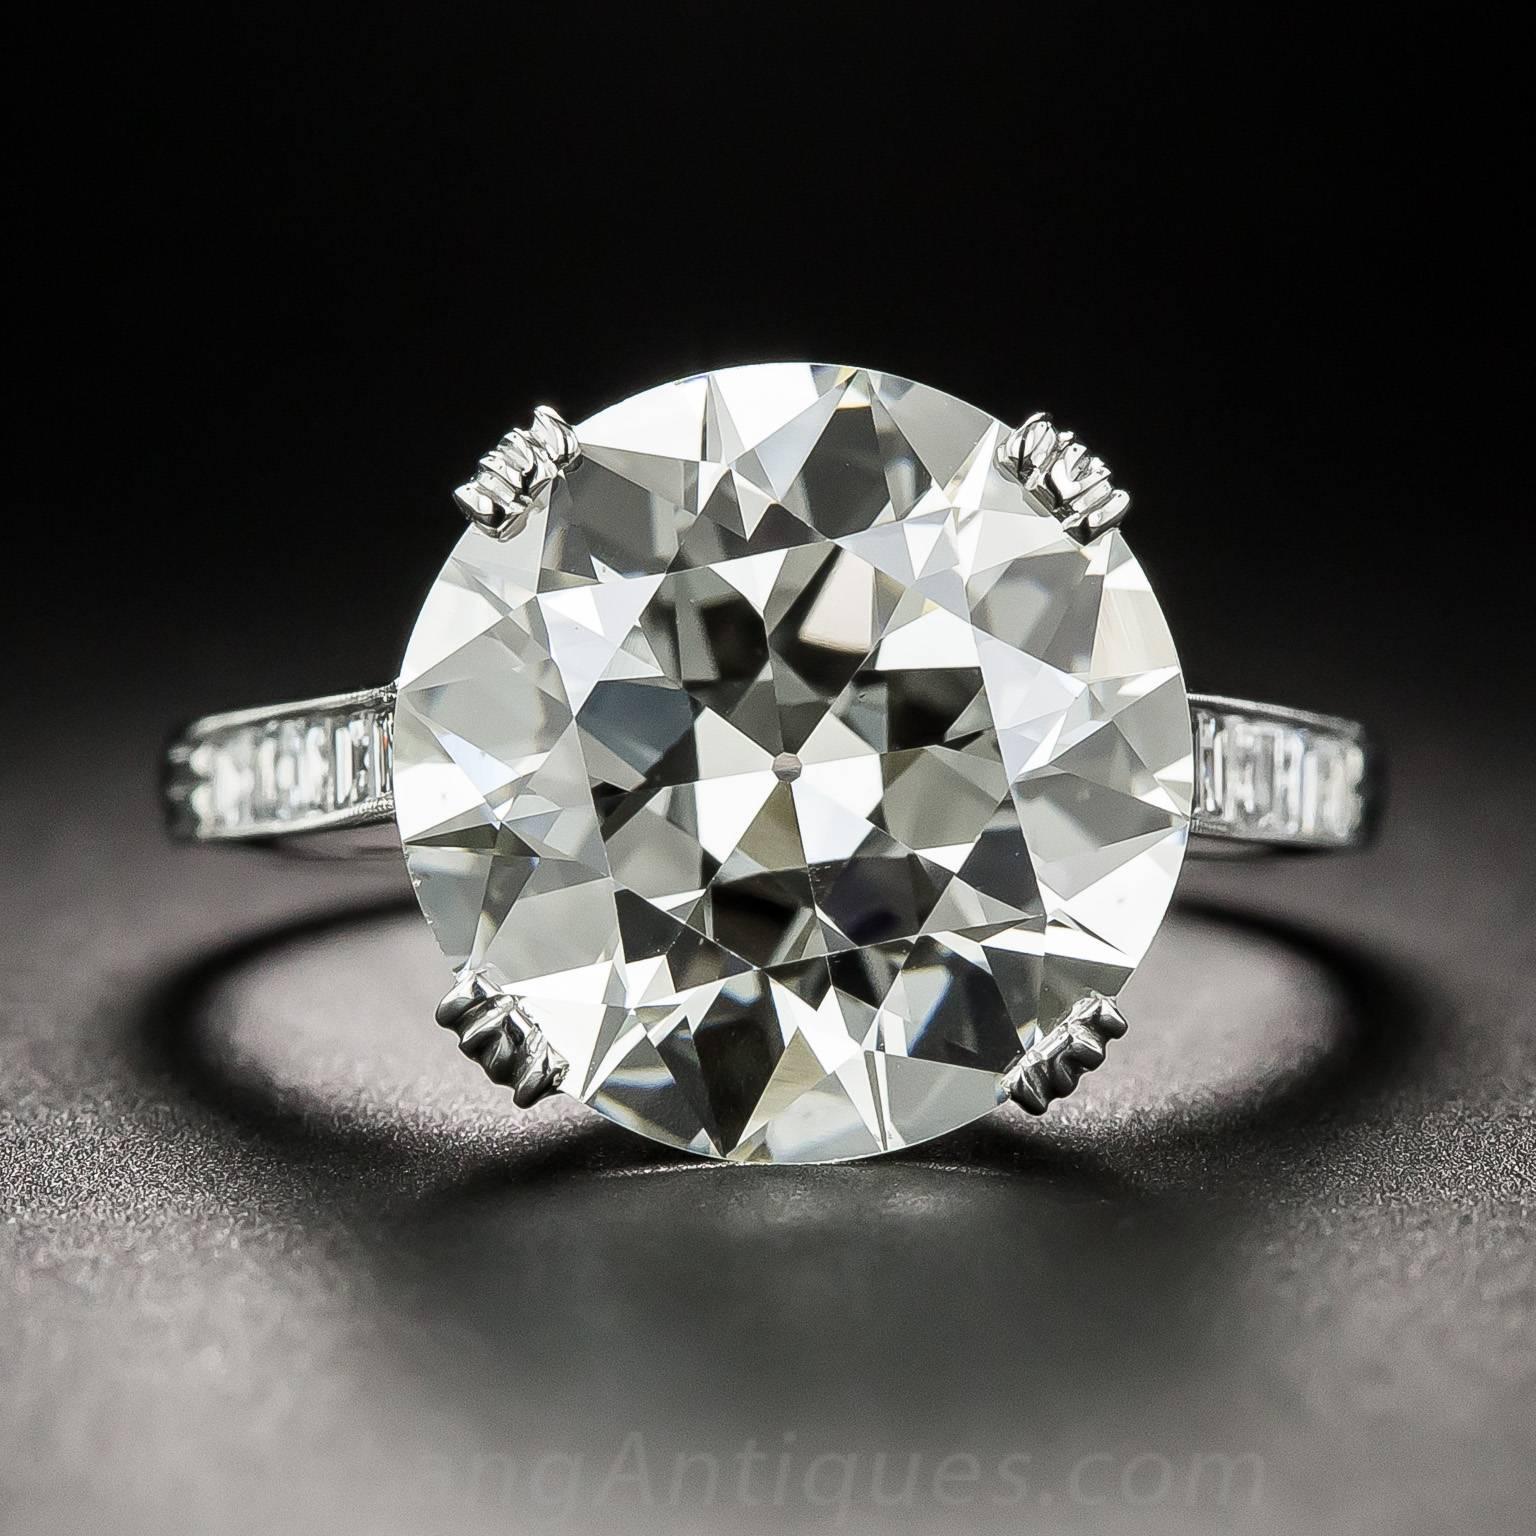 Light up your life! This spectacular sizzler, dating from the 1920s-30s, stars an ultra-sparkling European-cut diamond weighing 6.78 carats. The big beautiful stone beams brilliantly and intensely from within an exquisitely understated mounting that